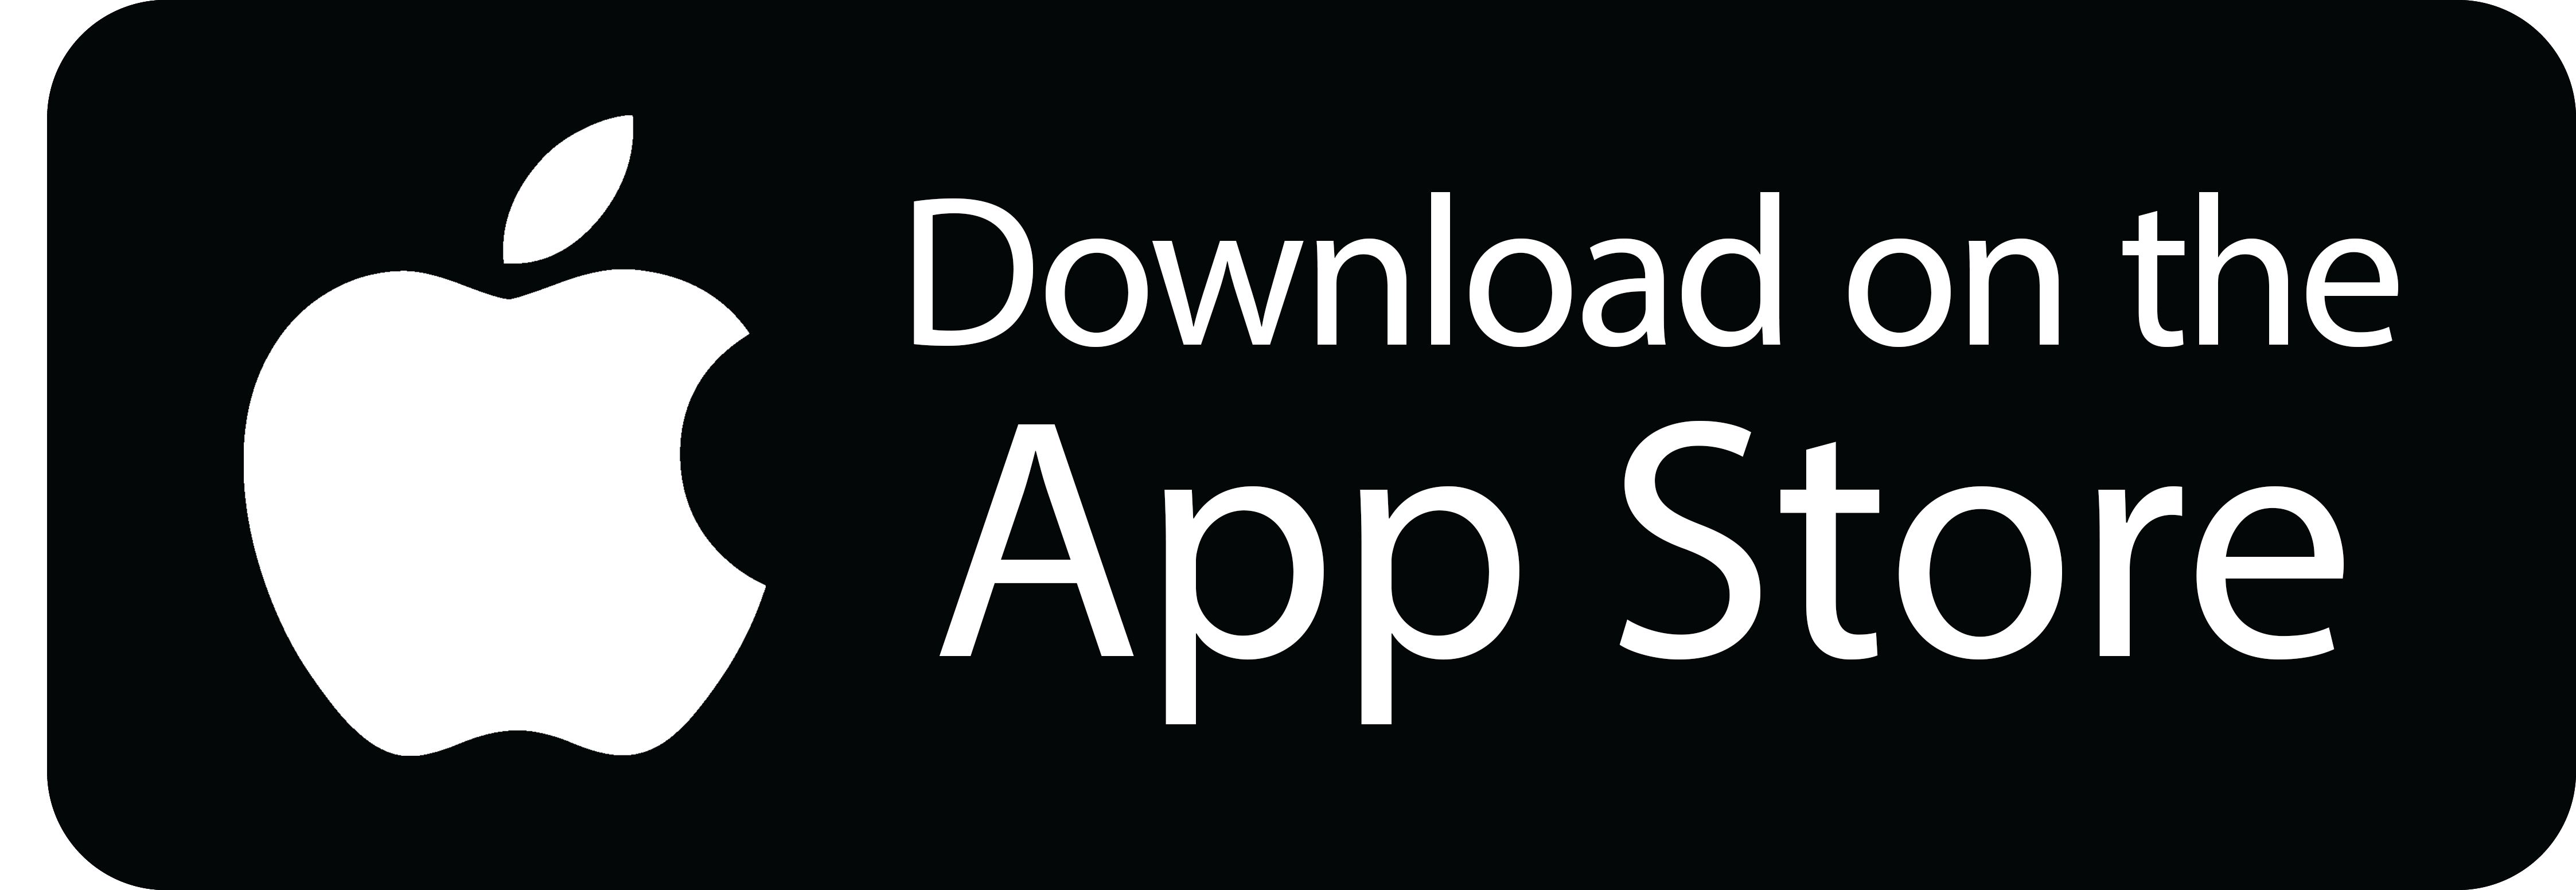 Download app for iOS